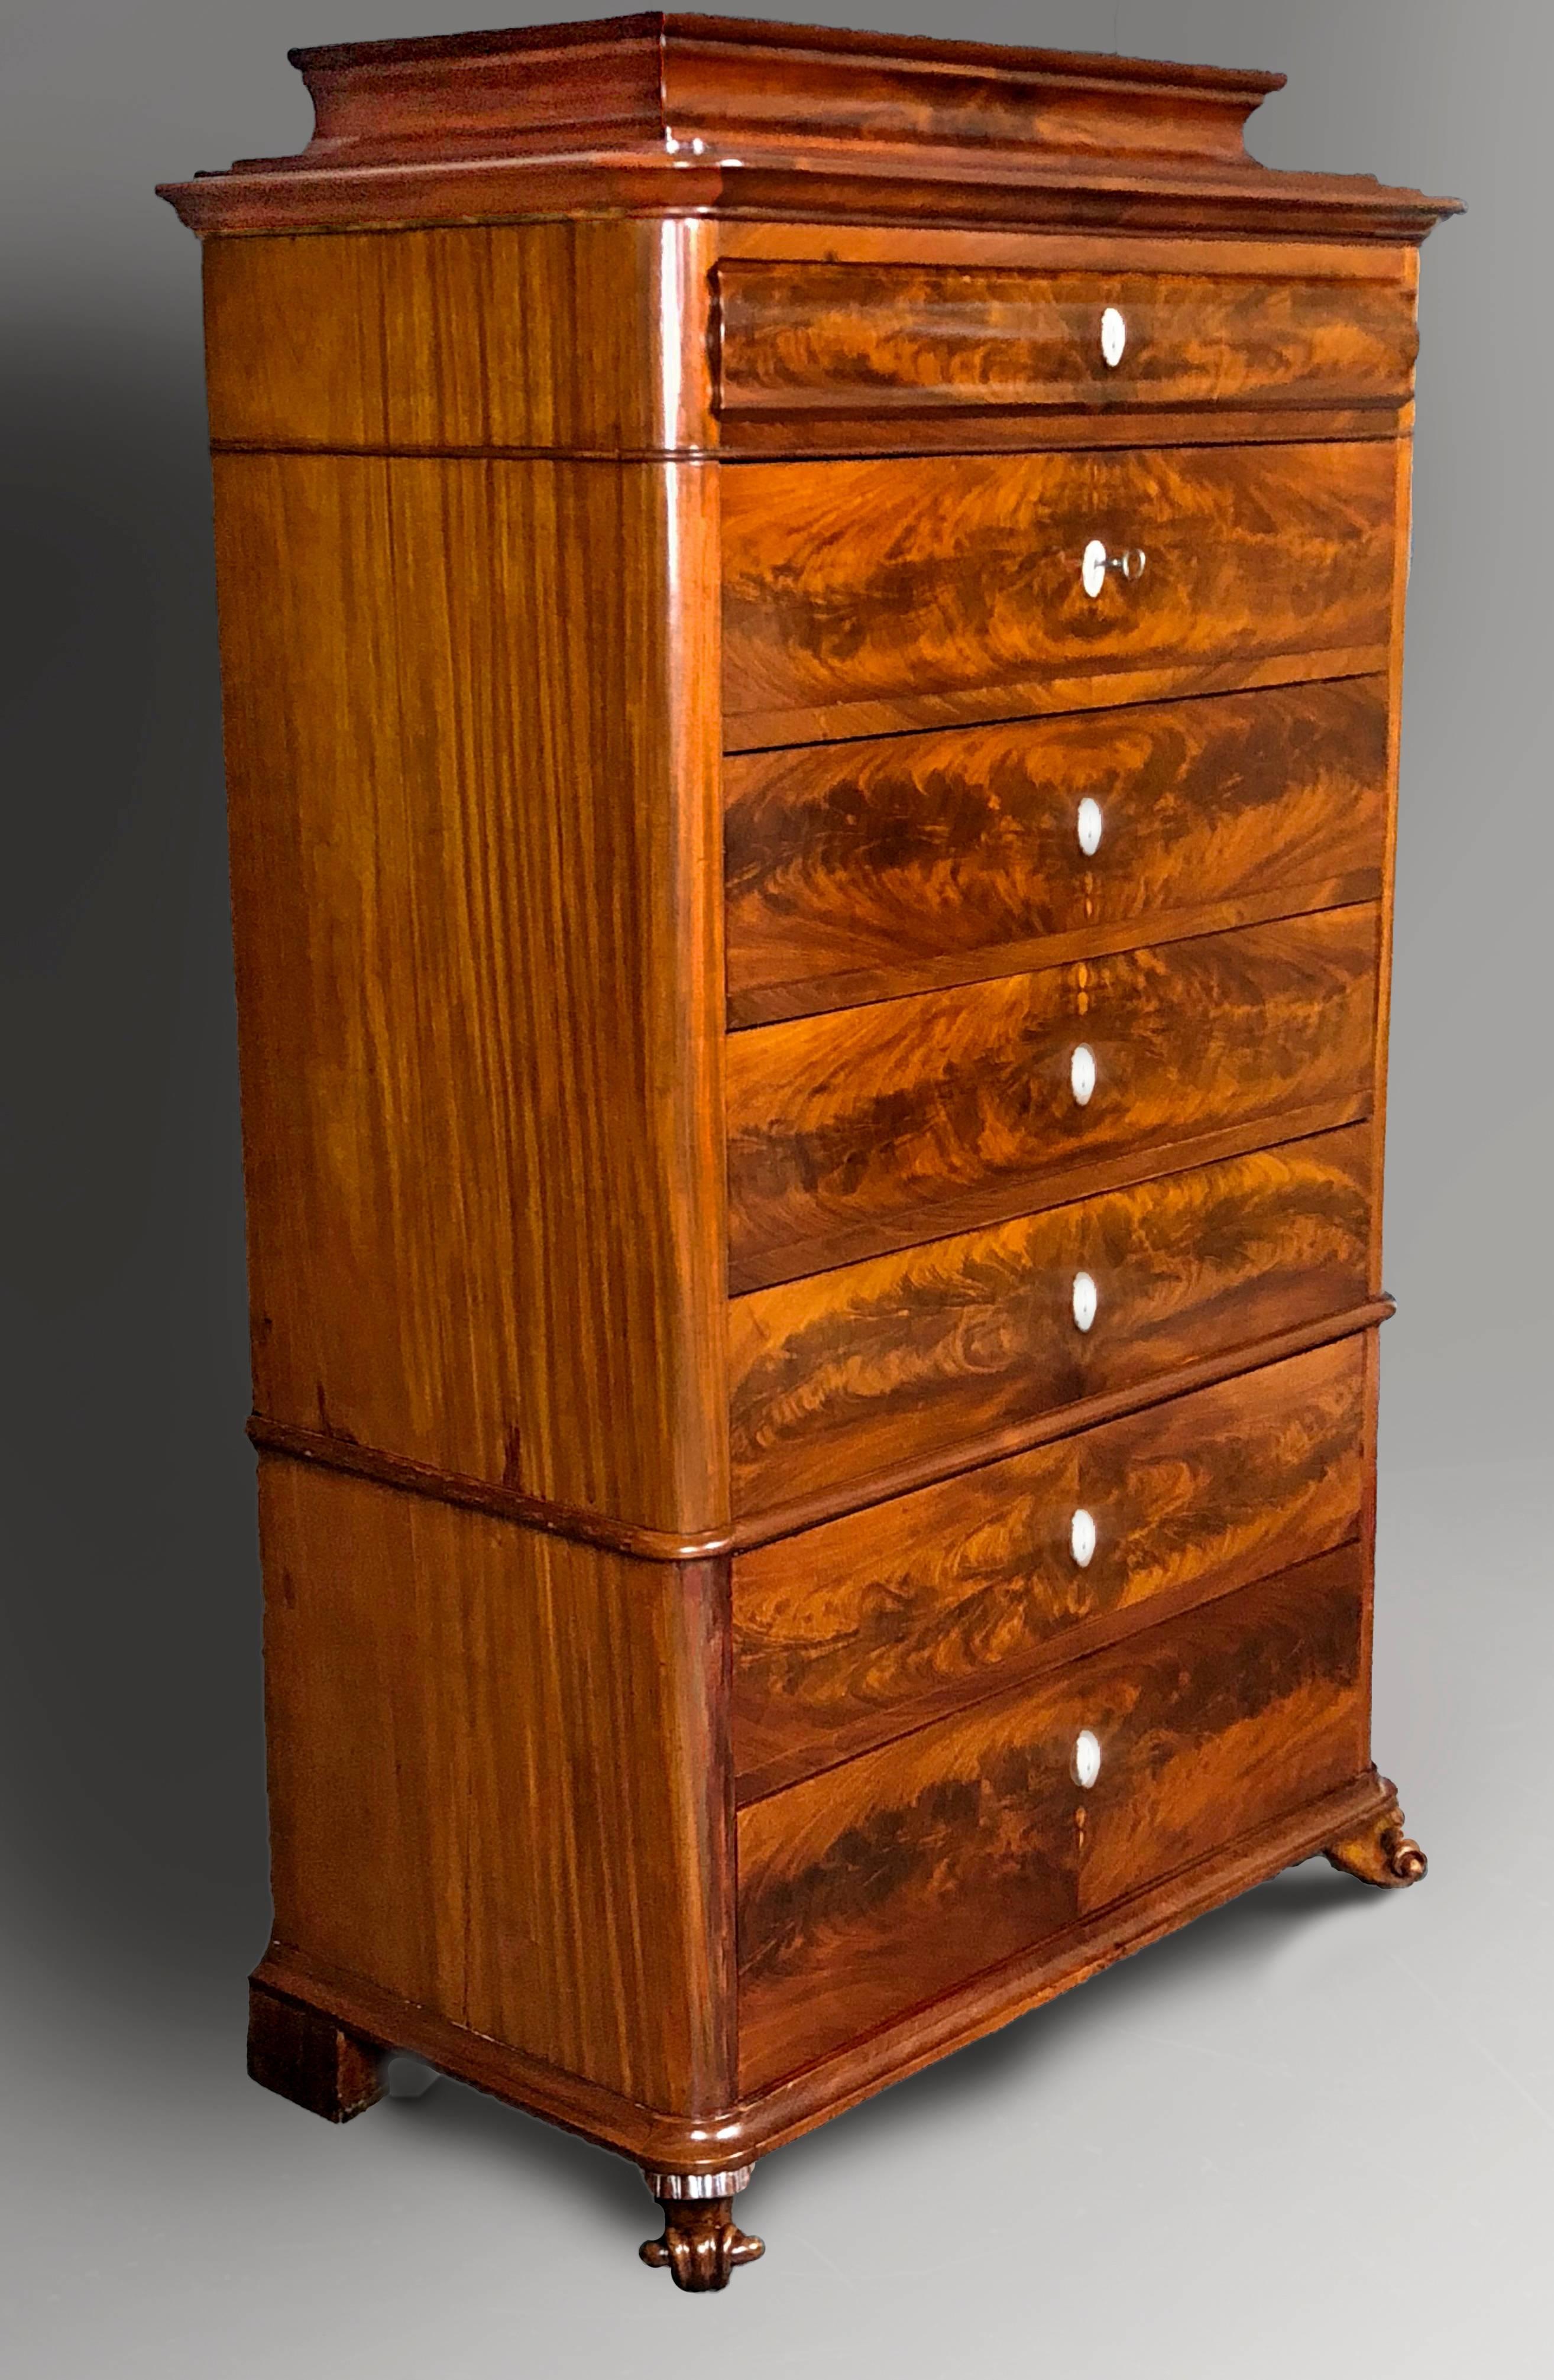 Attractive flame mahogany Danish Biedermeier tallboy commode dating to the end of the second quarter of the 19th century. It is of the 